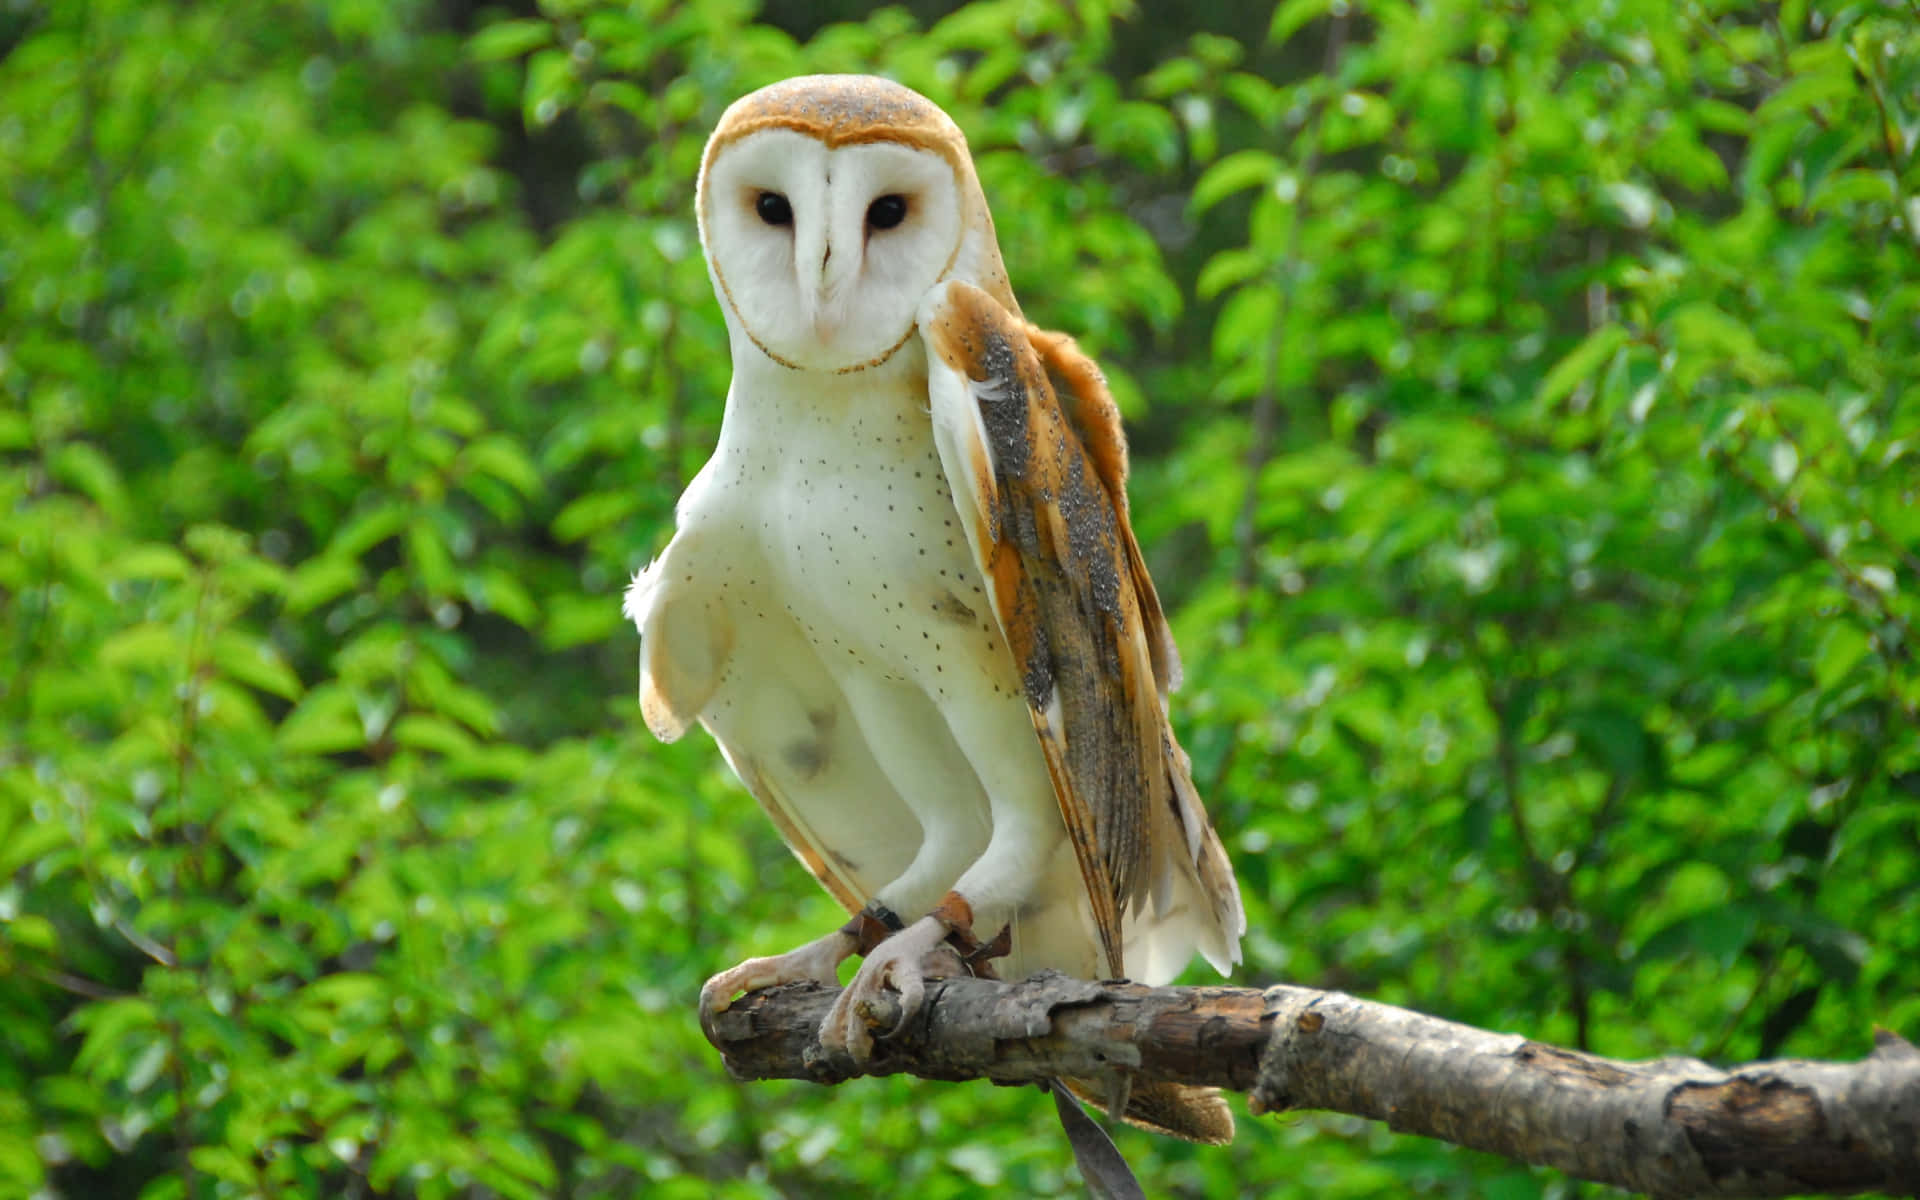 An adult barn owl perched on a branch